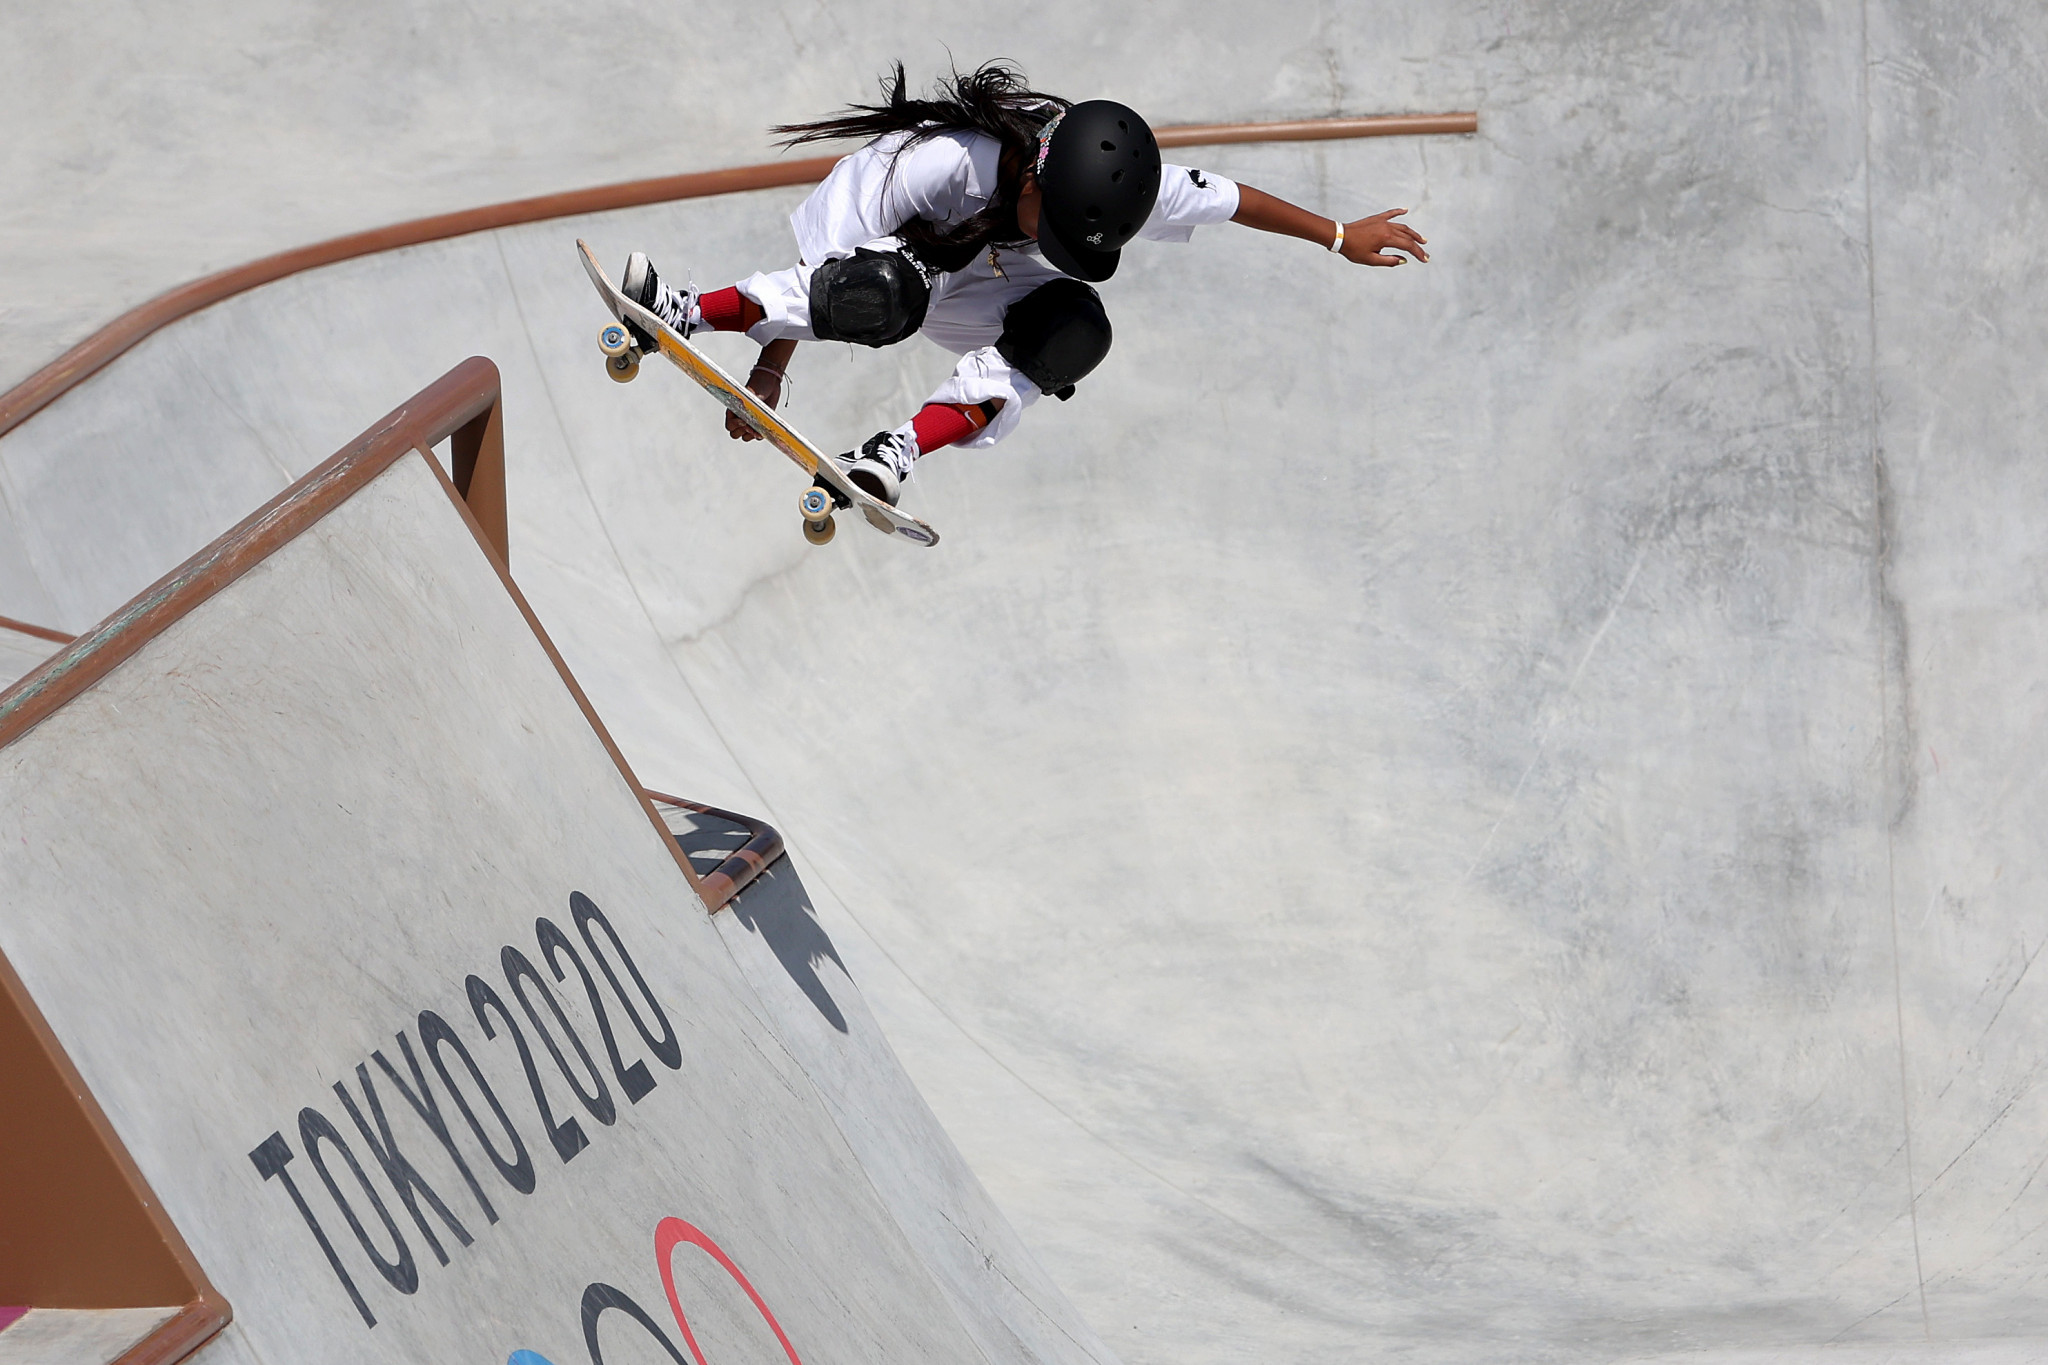 Japan's Kokona Hiraki - 12 years and 343 days old - won women's park skateboarding silver, becoming the youngest Olympic medallist since 1936 ©Getty Images